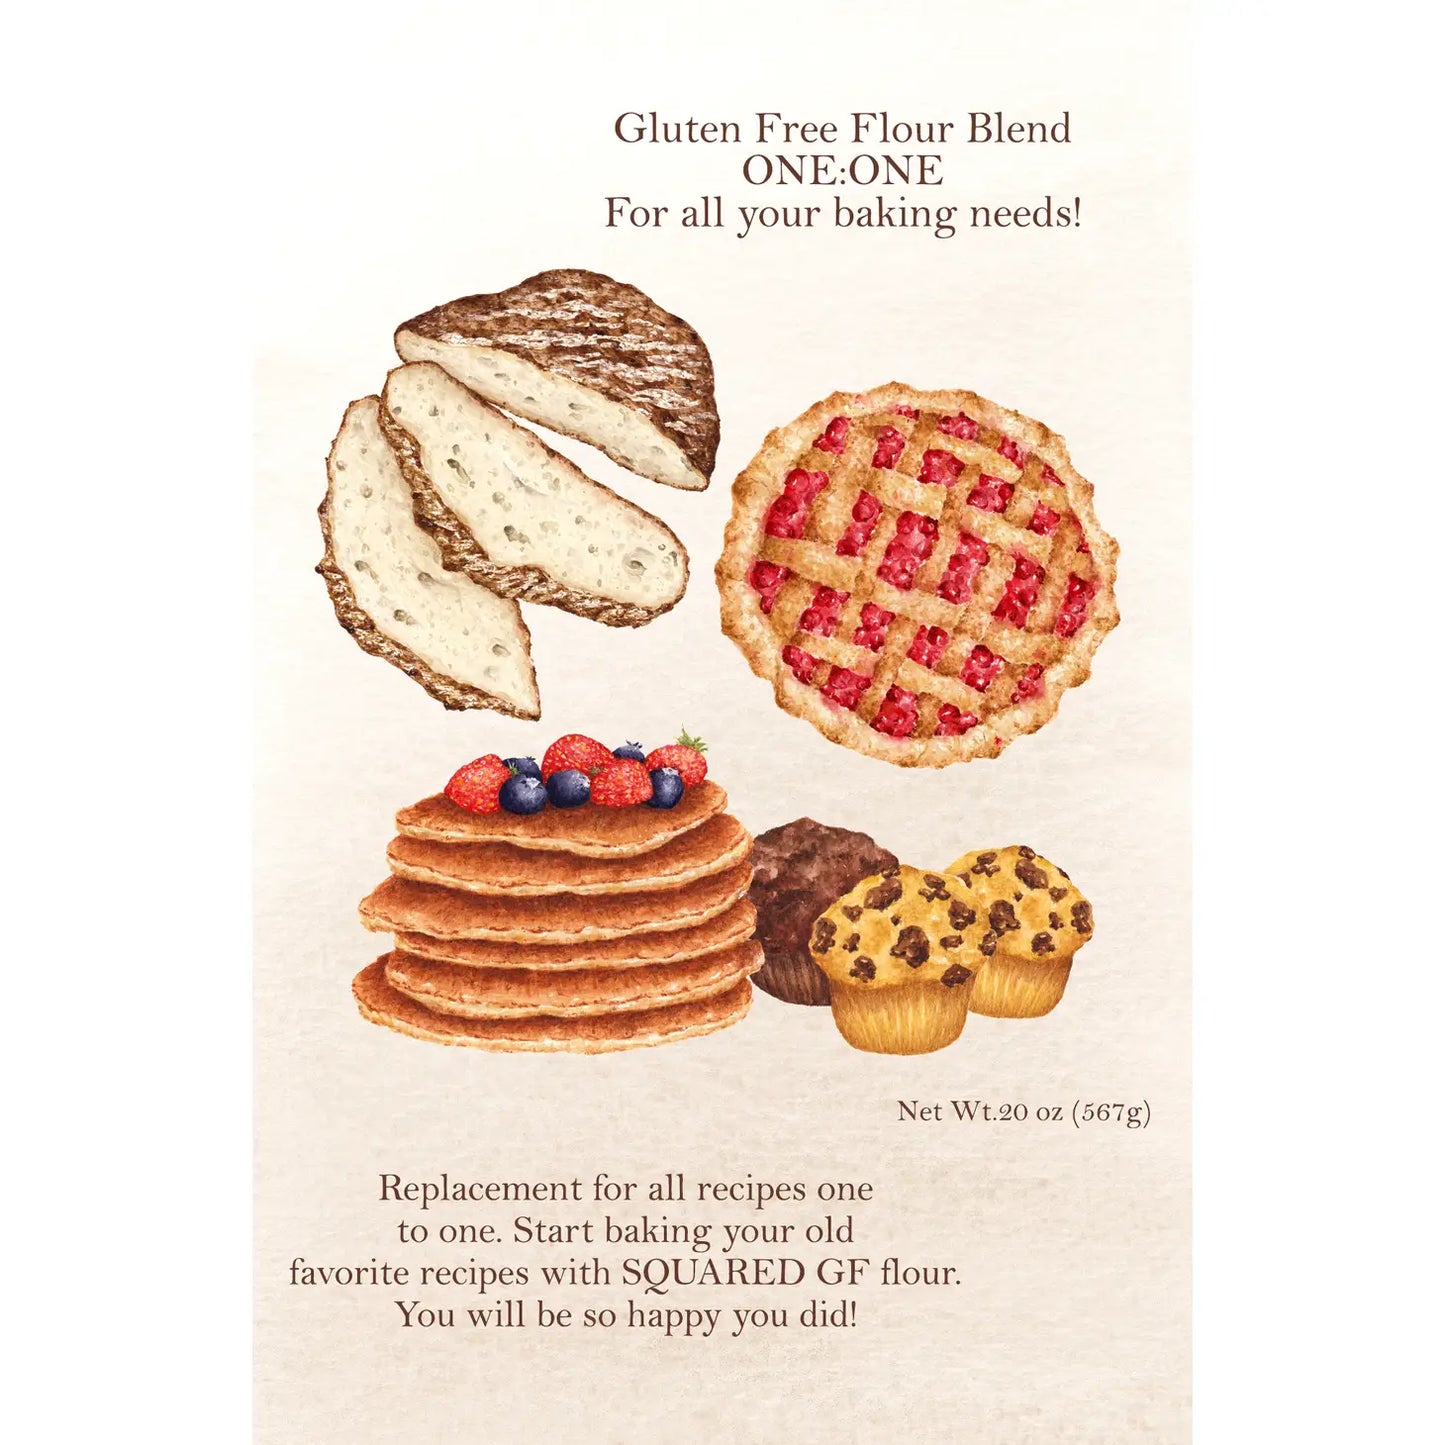 Gluten Free Flour Blend 3LB Bag  One to One replacement.